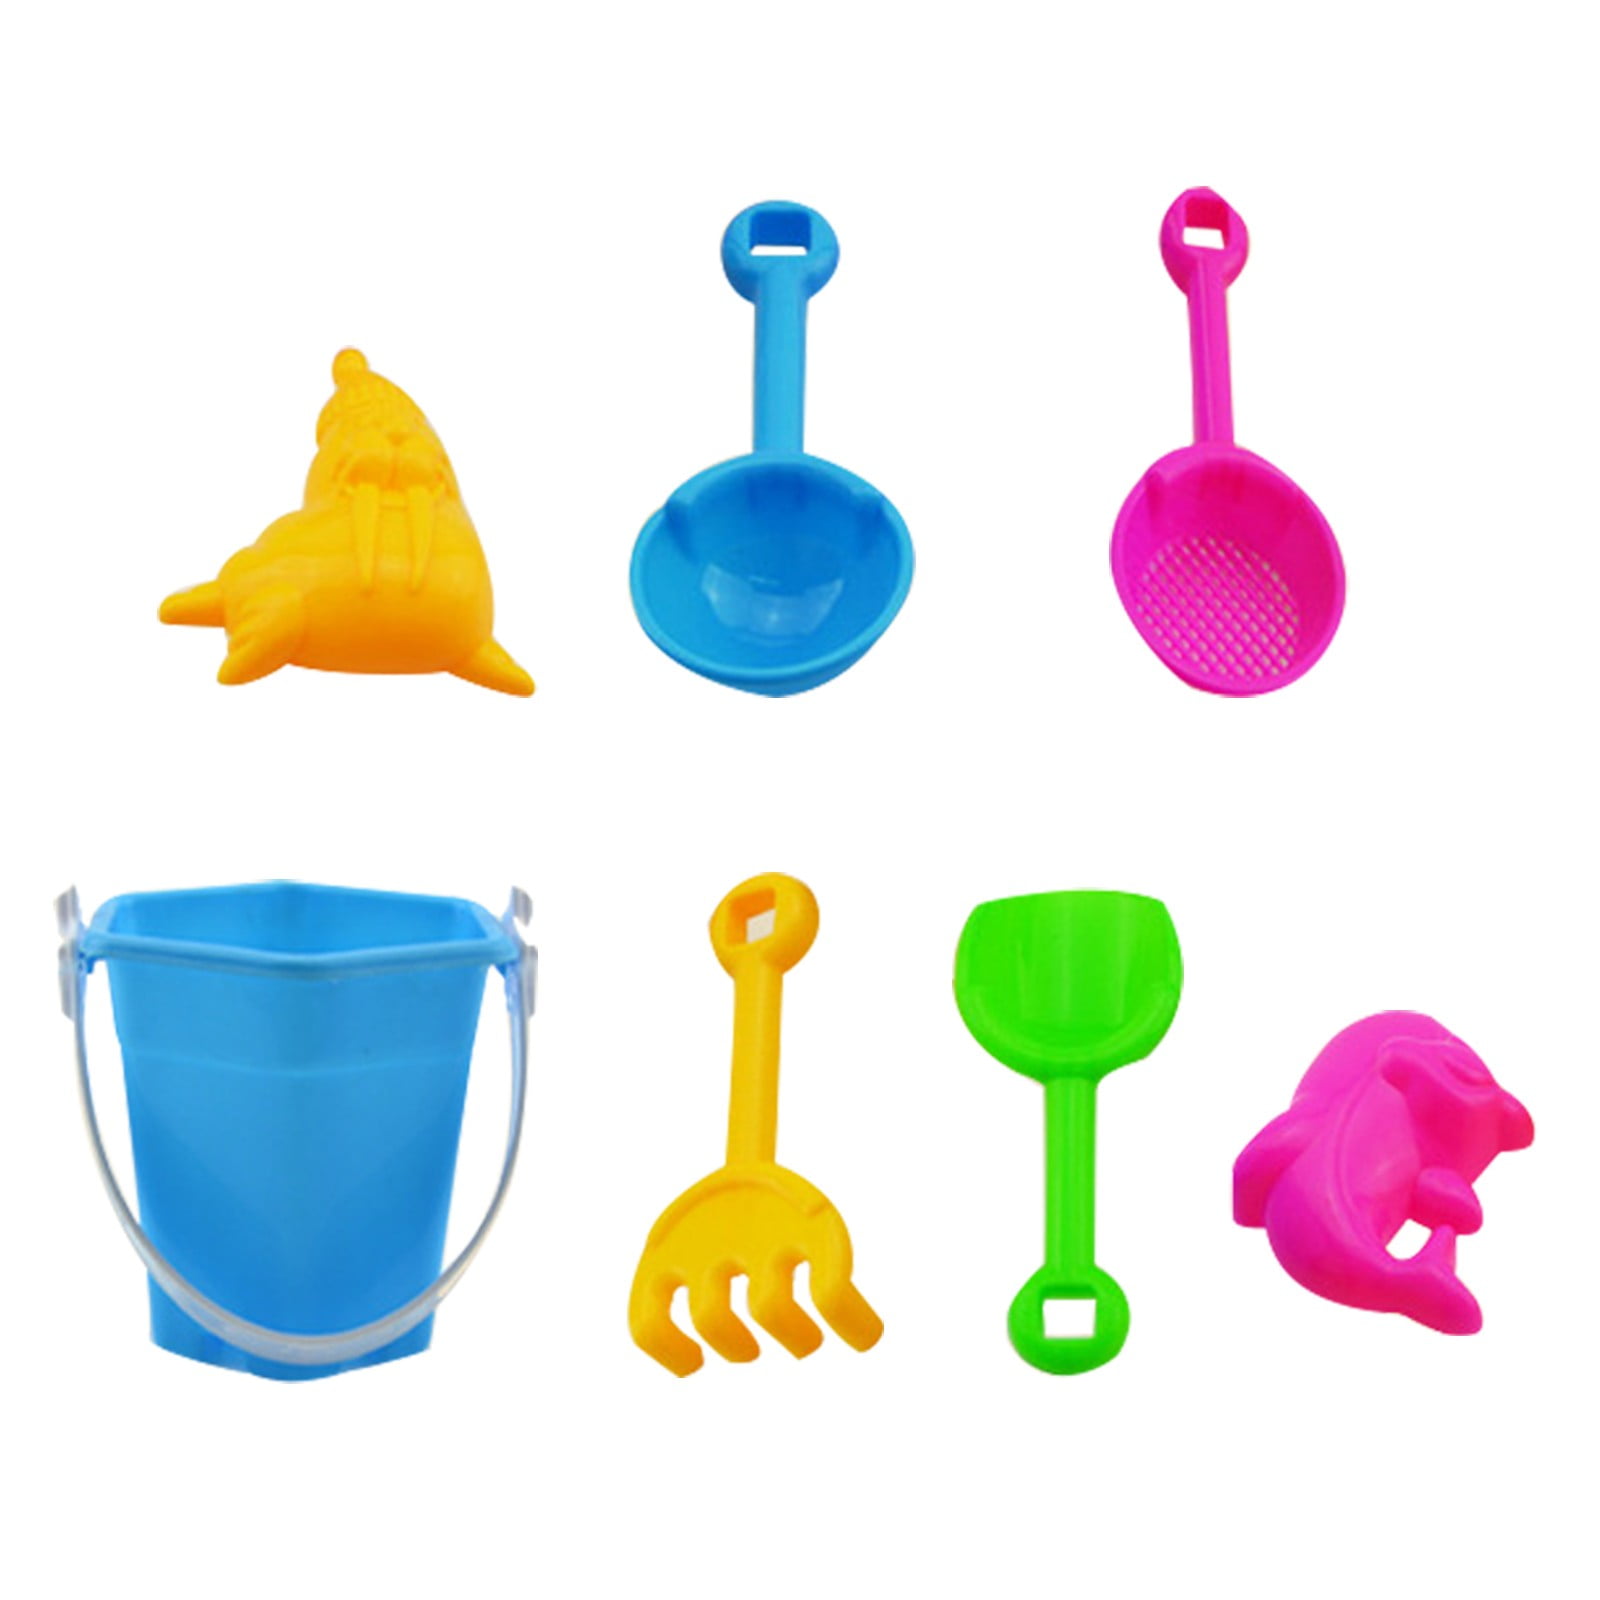 Details about   Kids Sandpit Toys Activity Child Play Outdoor Sand Beach Bucket Truck Rake More 